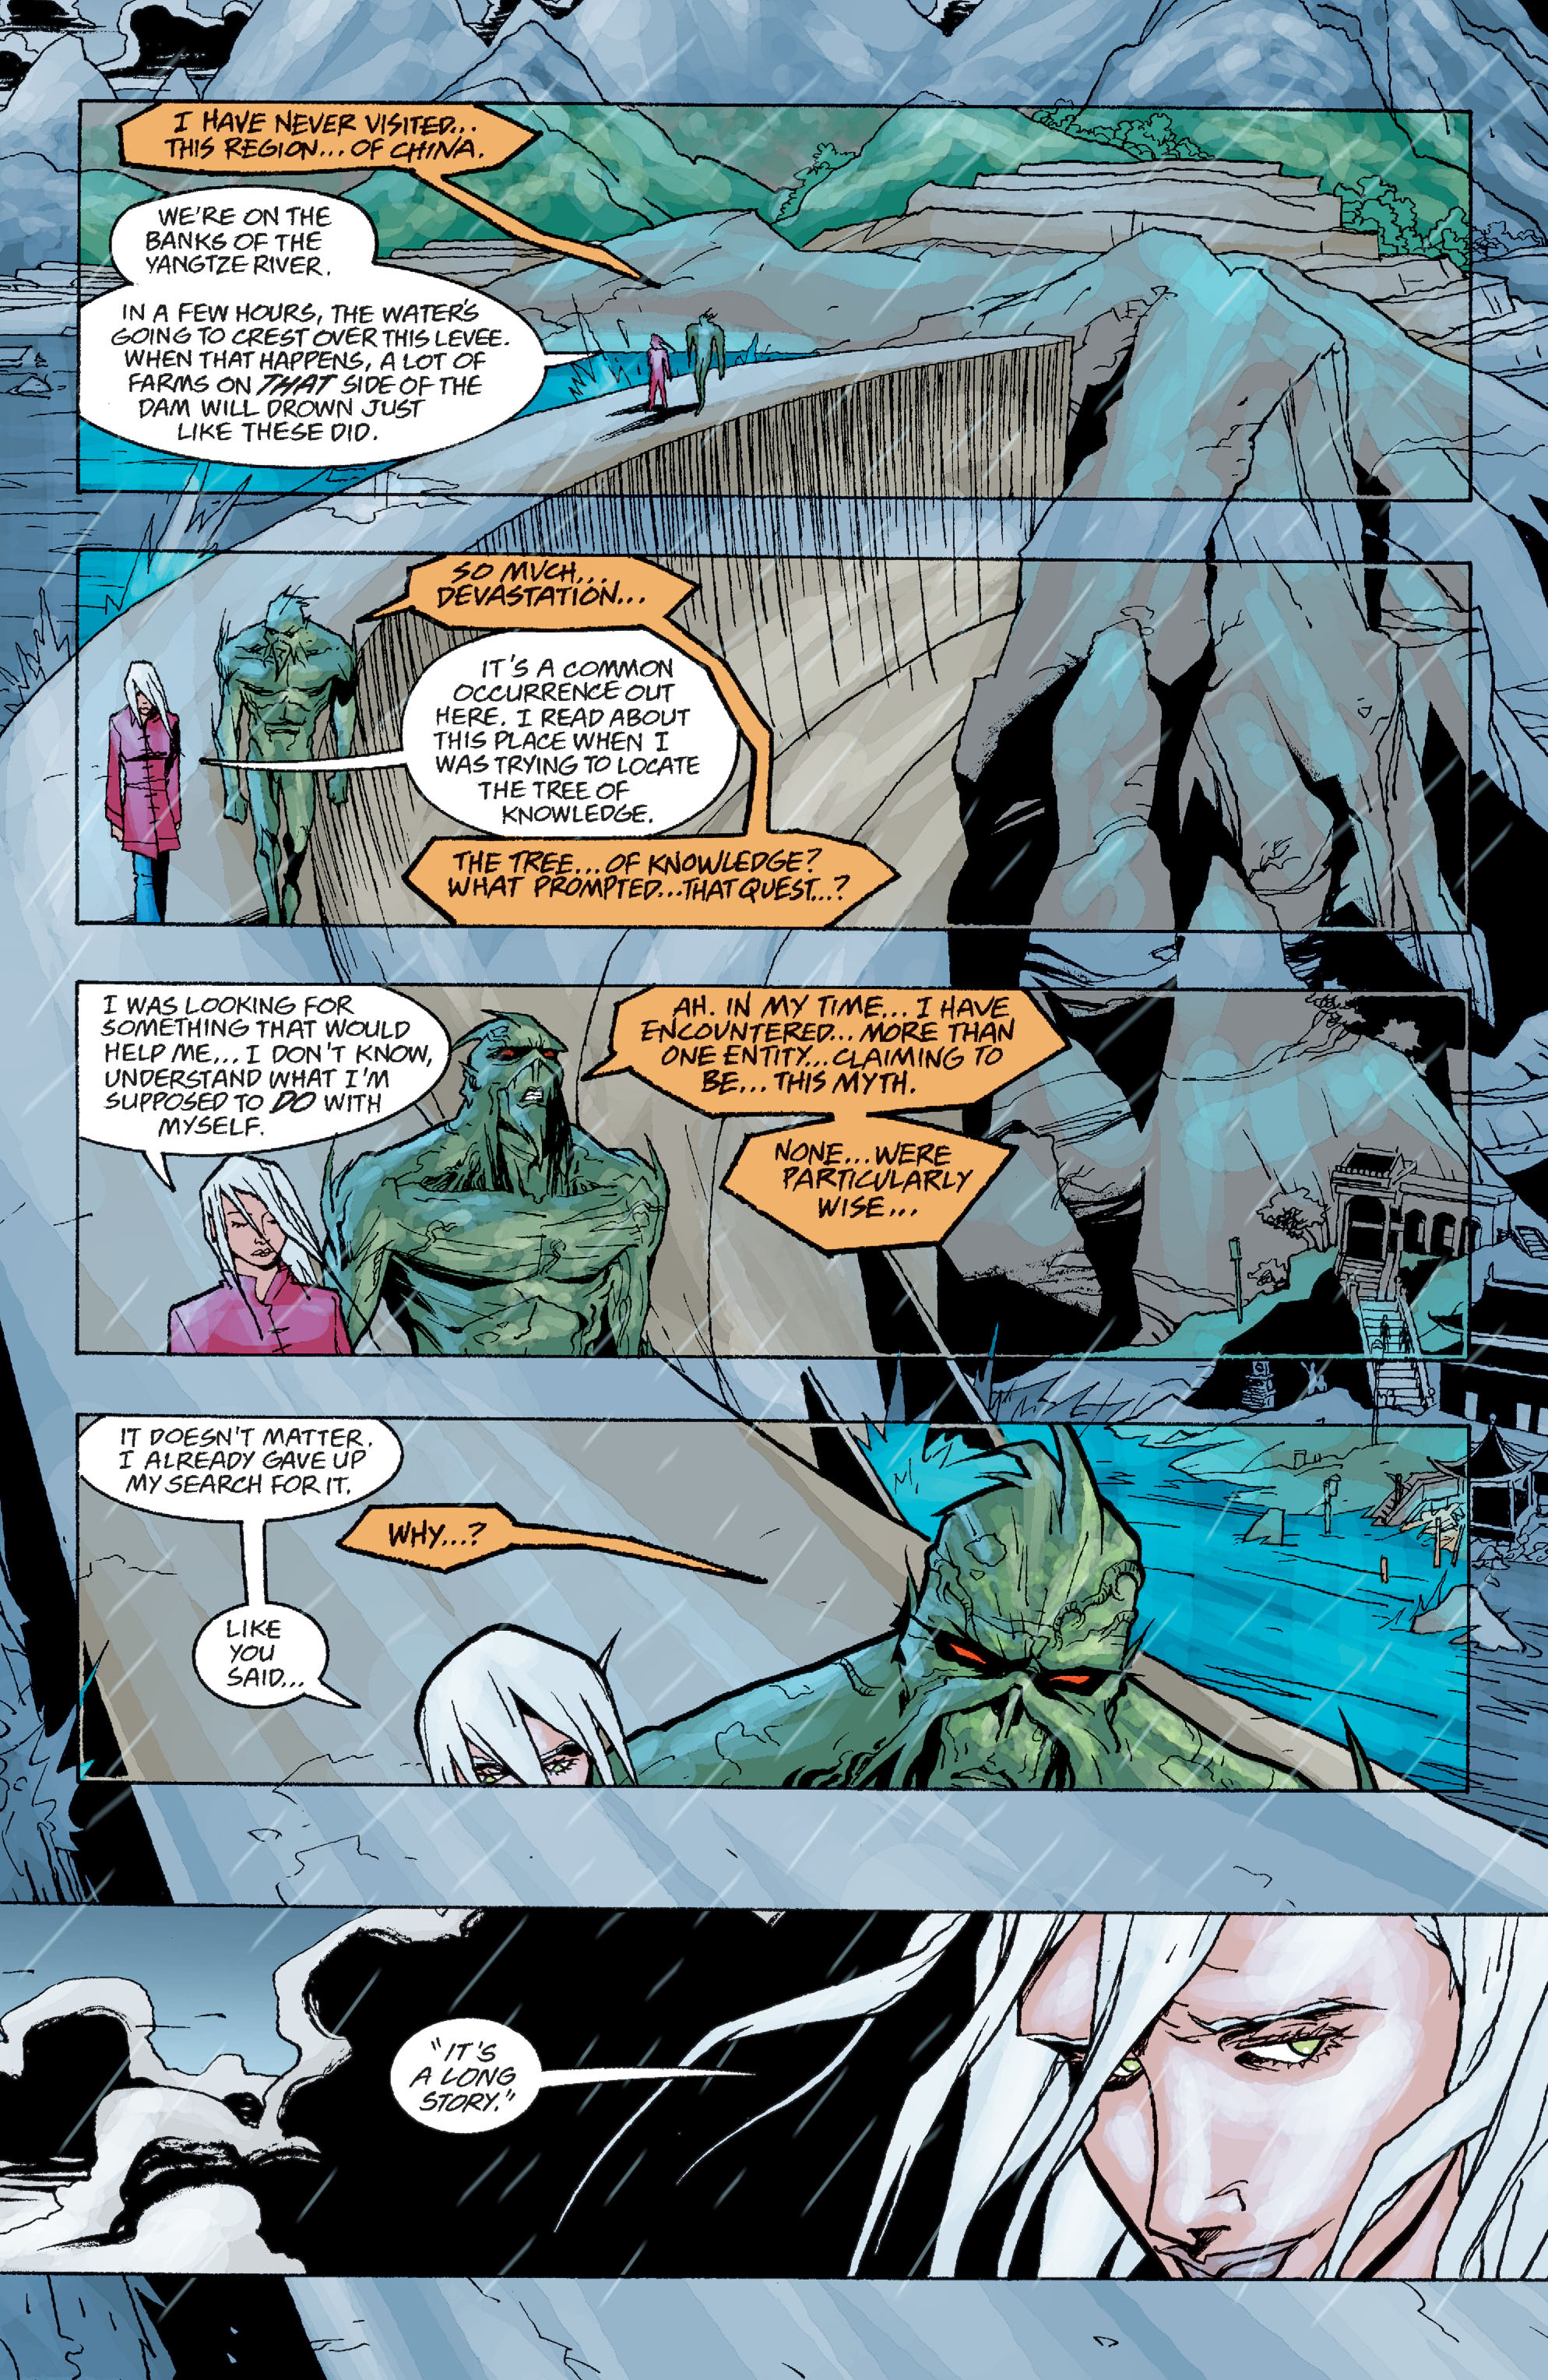 Read online Swamp Thing (2000) comic -  Issue # TPB 2 - 198